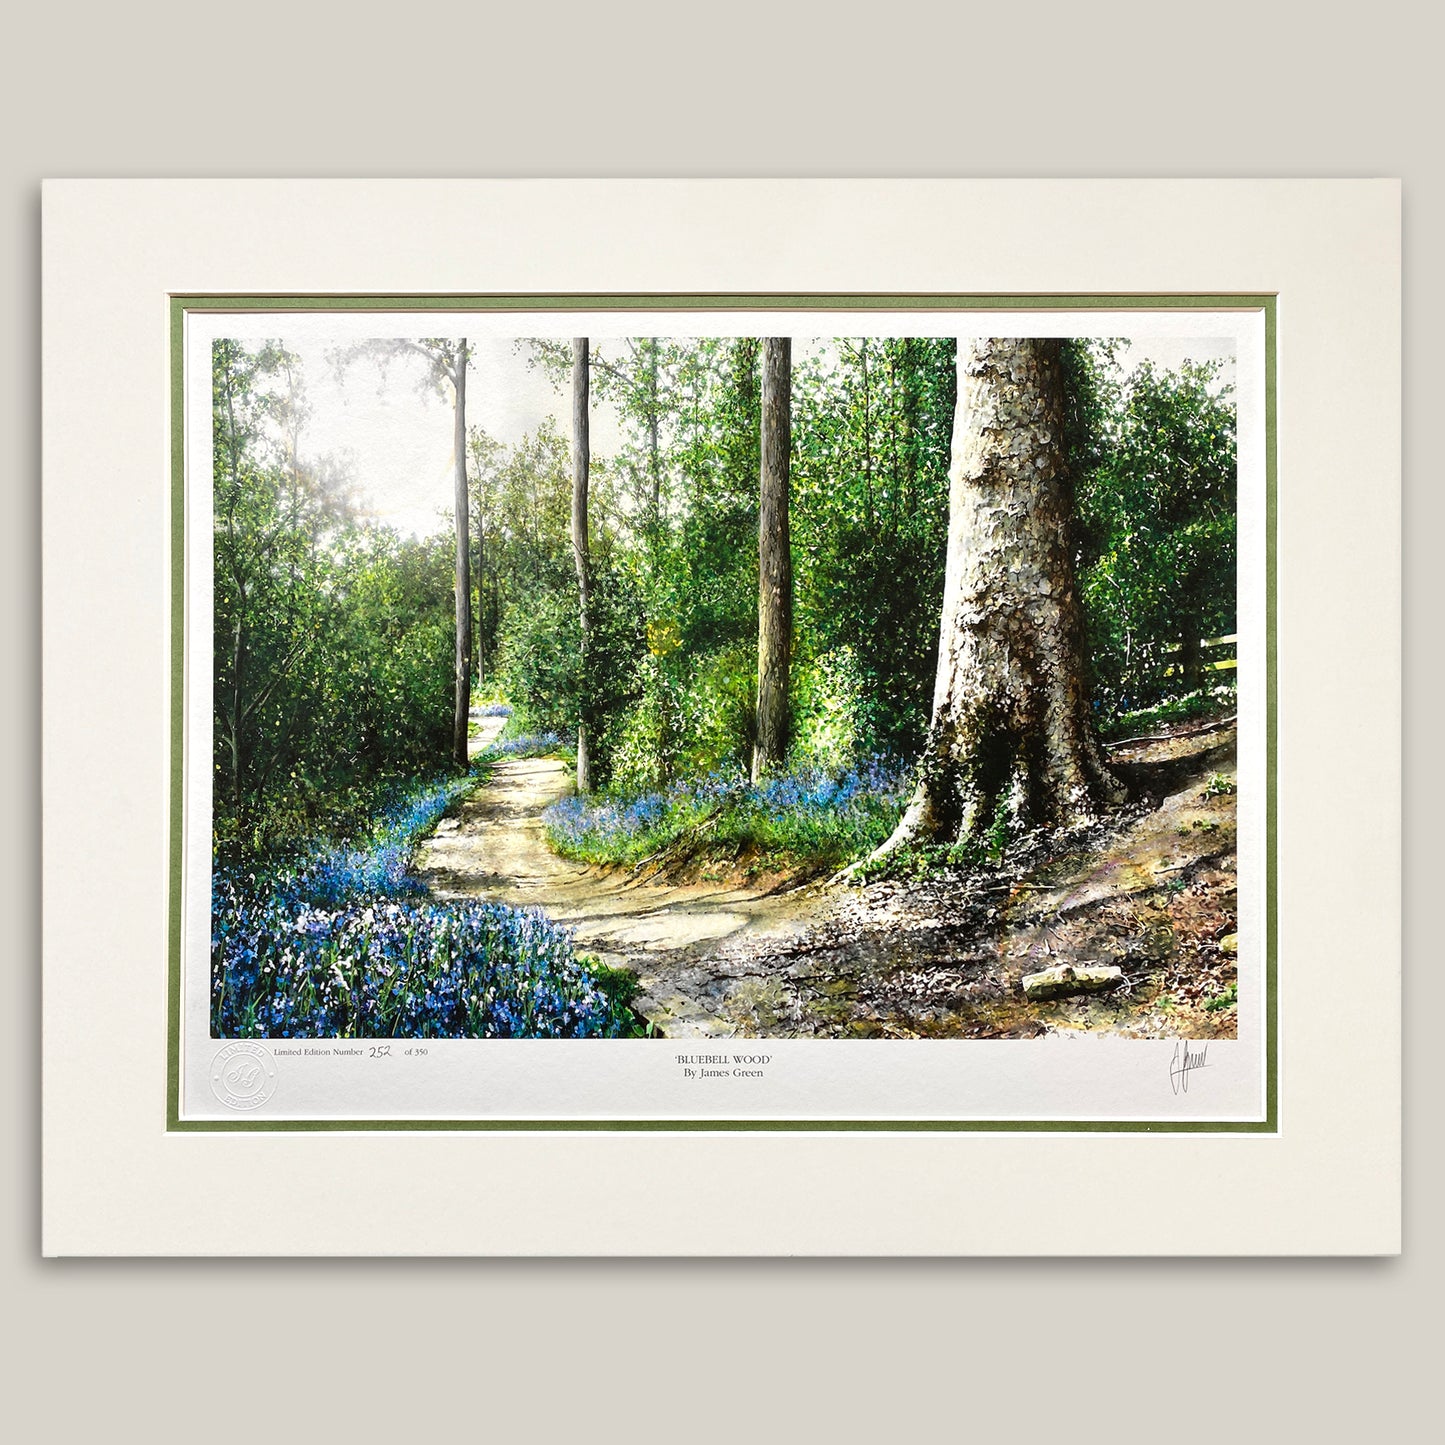 double mounted limited edition print of a  painting of bluebell woods by peterborough artist James Green